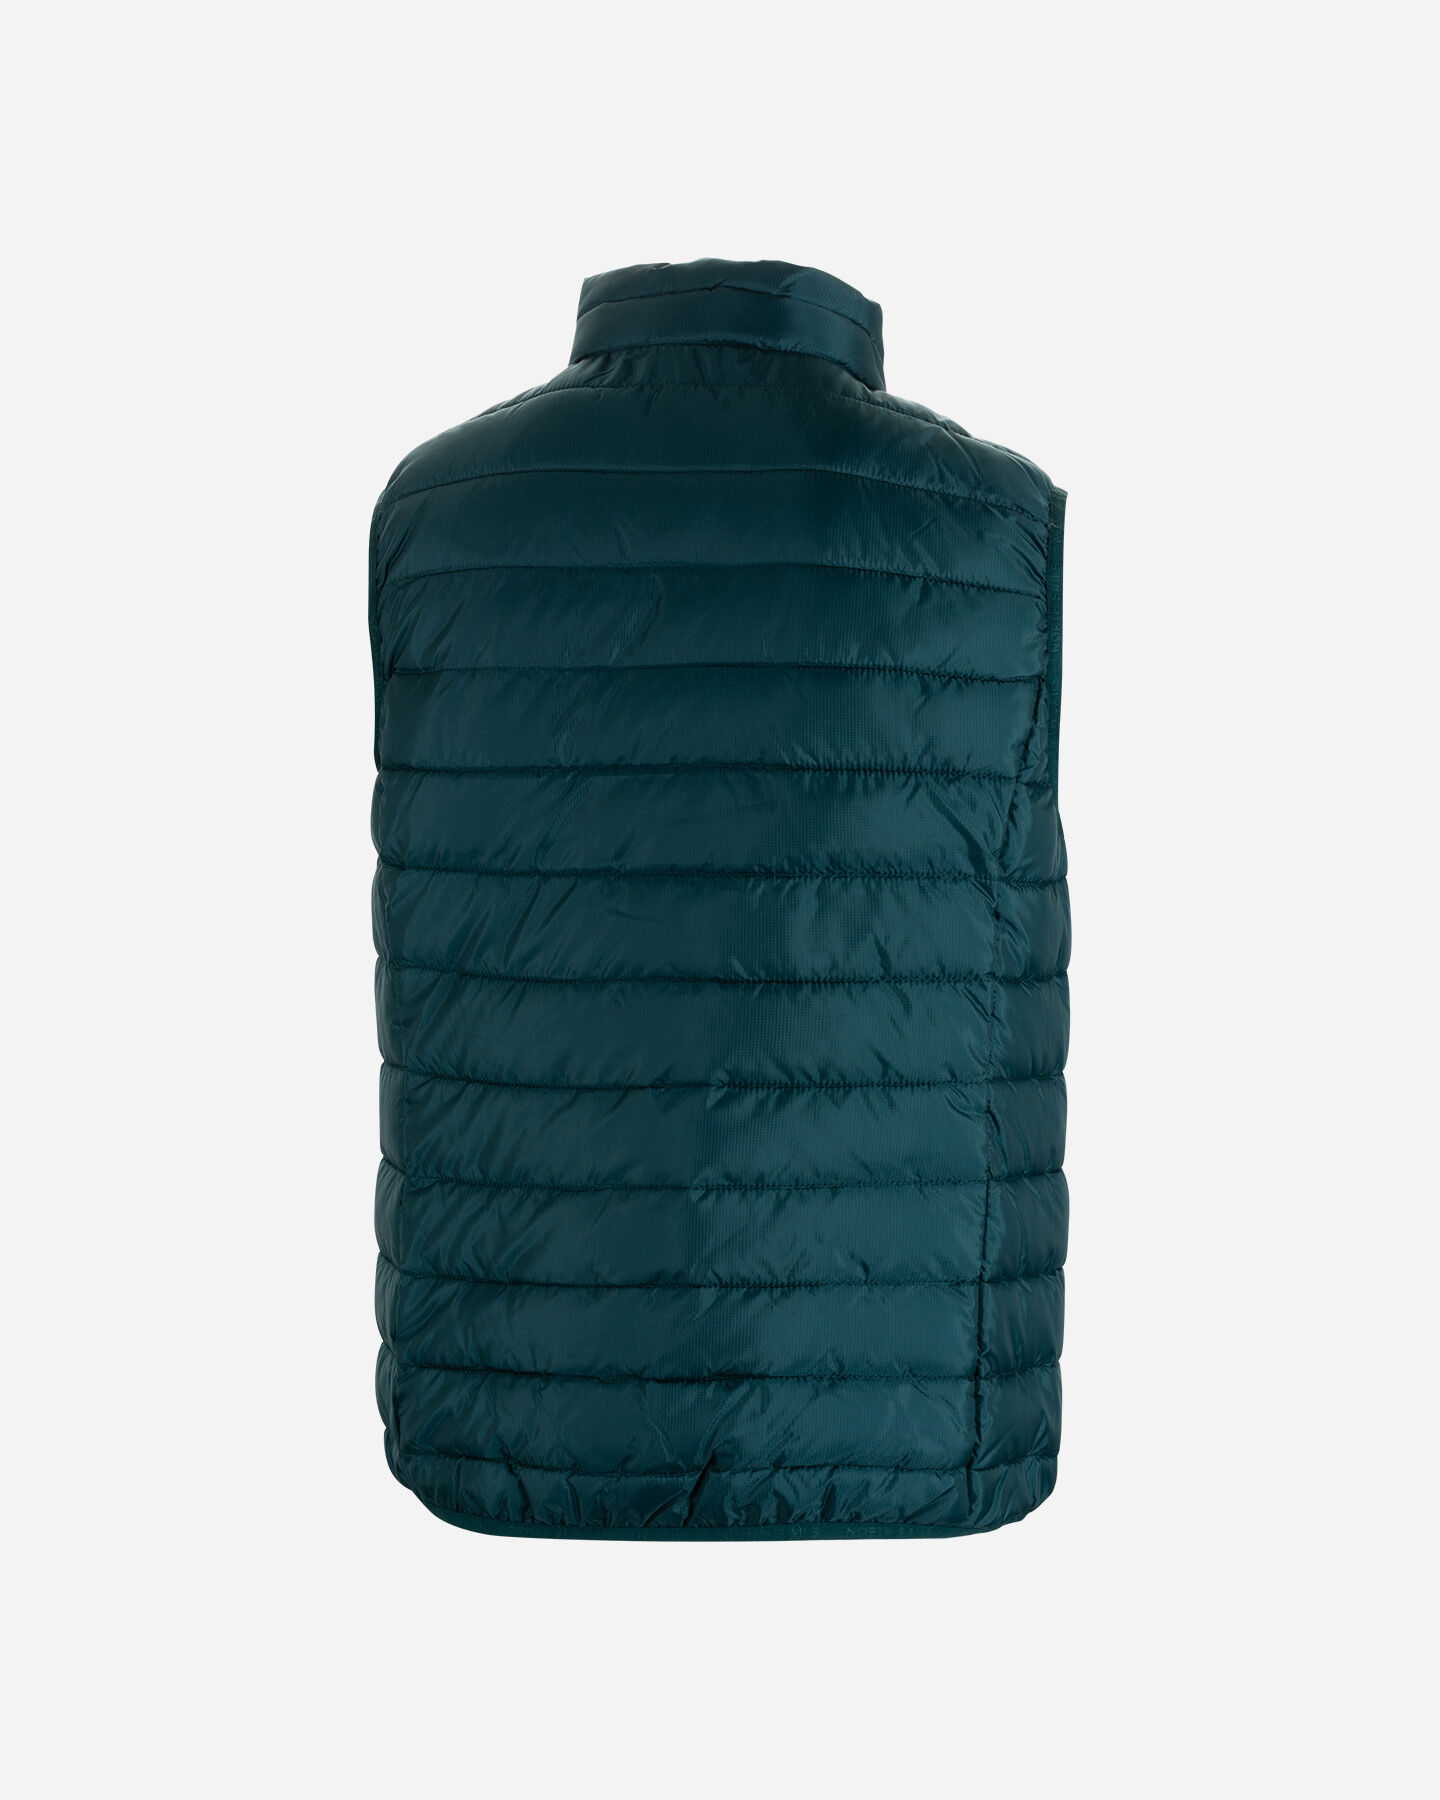  Gilet NORTH SAILS RECYCLED SKYE RIPSTOP M S4113440|0749|M scatto 1